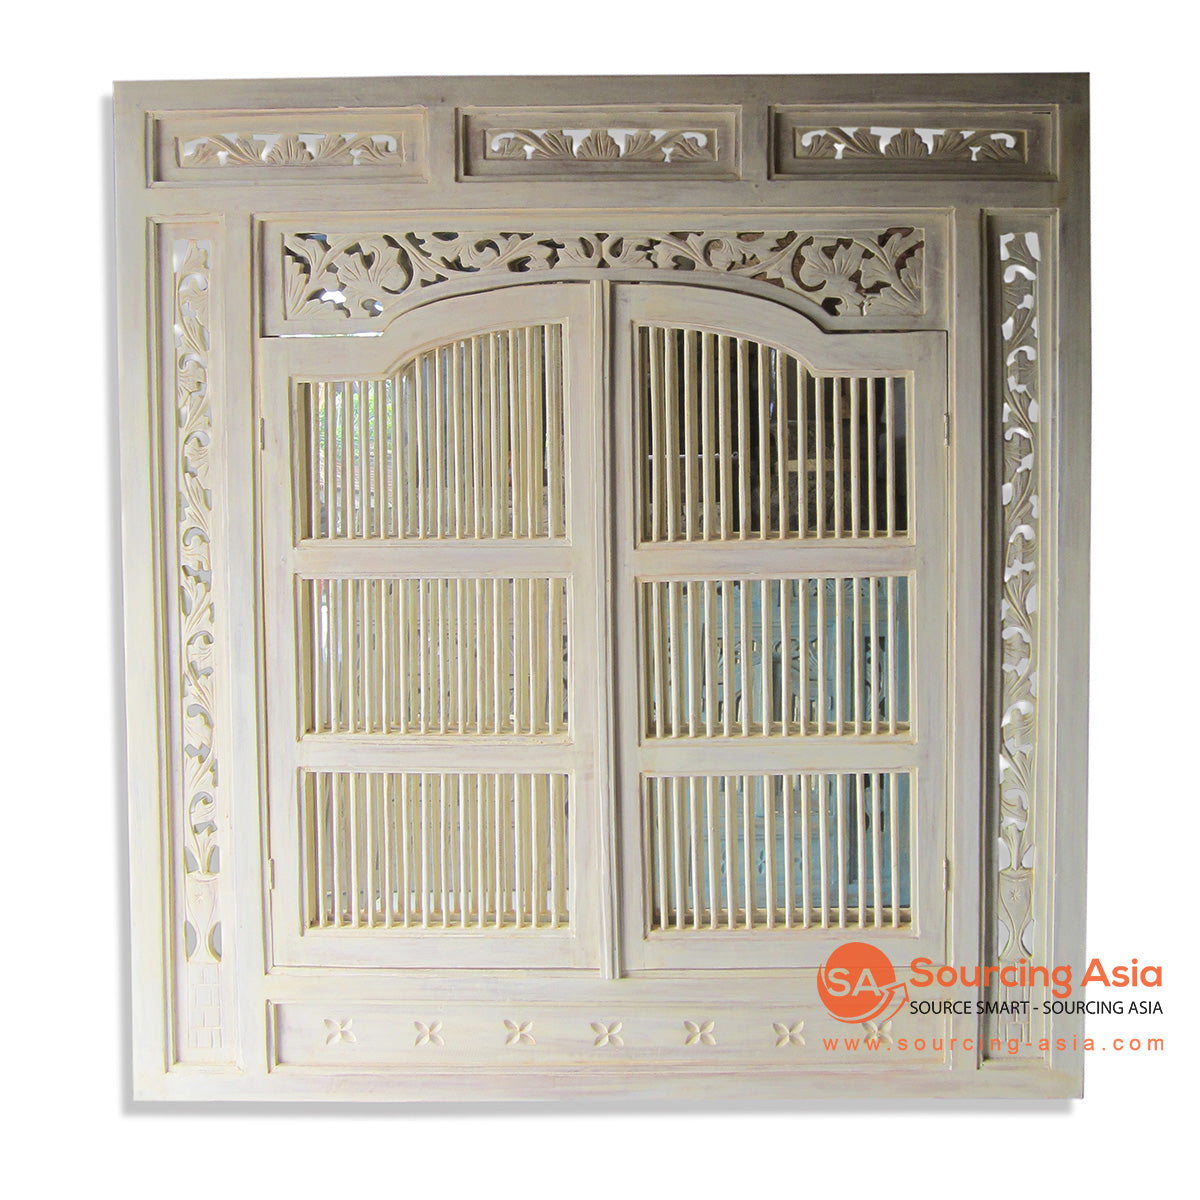 WIN003-CWA COUNTRY WHITE ANTIQUE WOODEN PRISON MIRROR DECORATION WITH GLASS 5MM